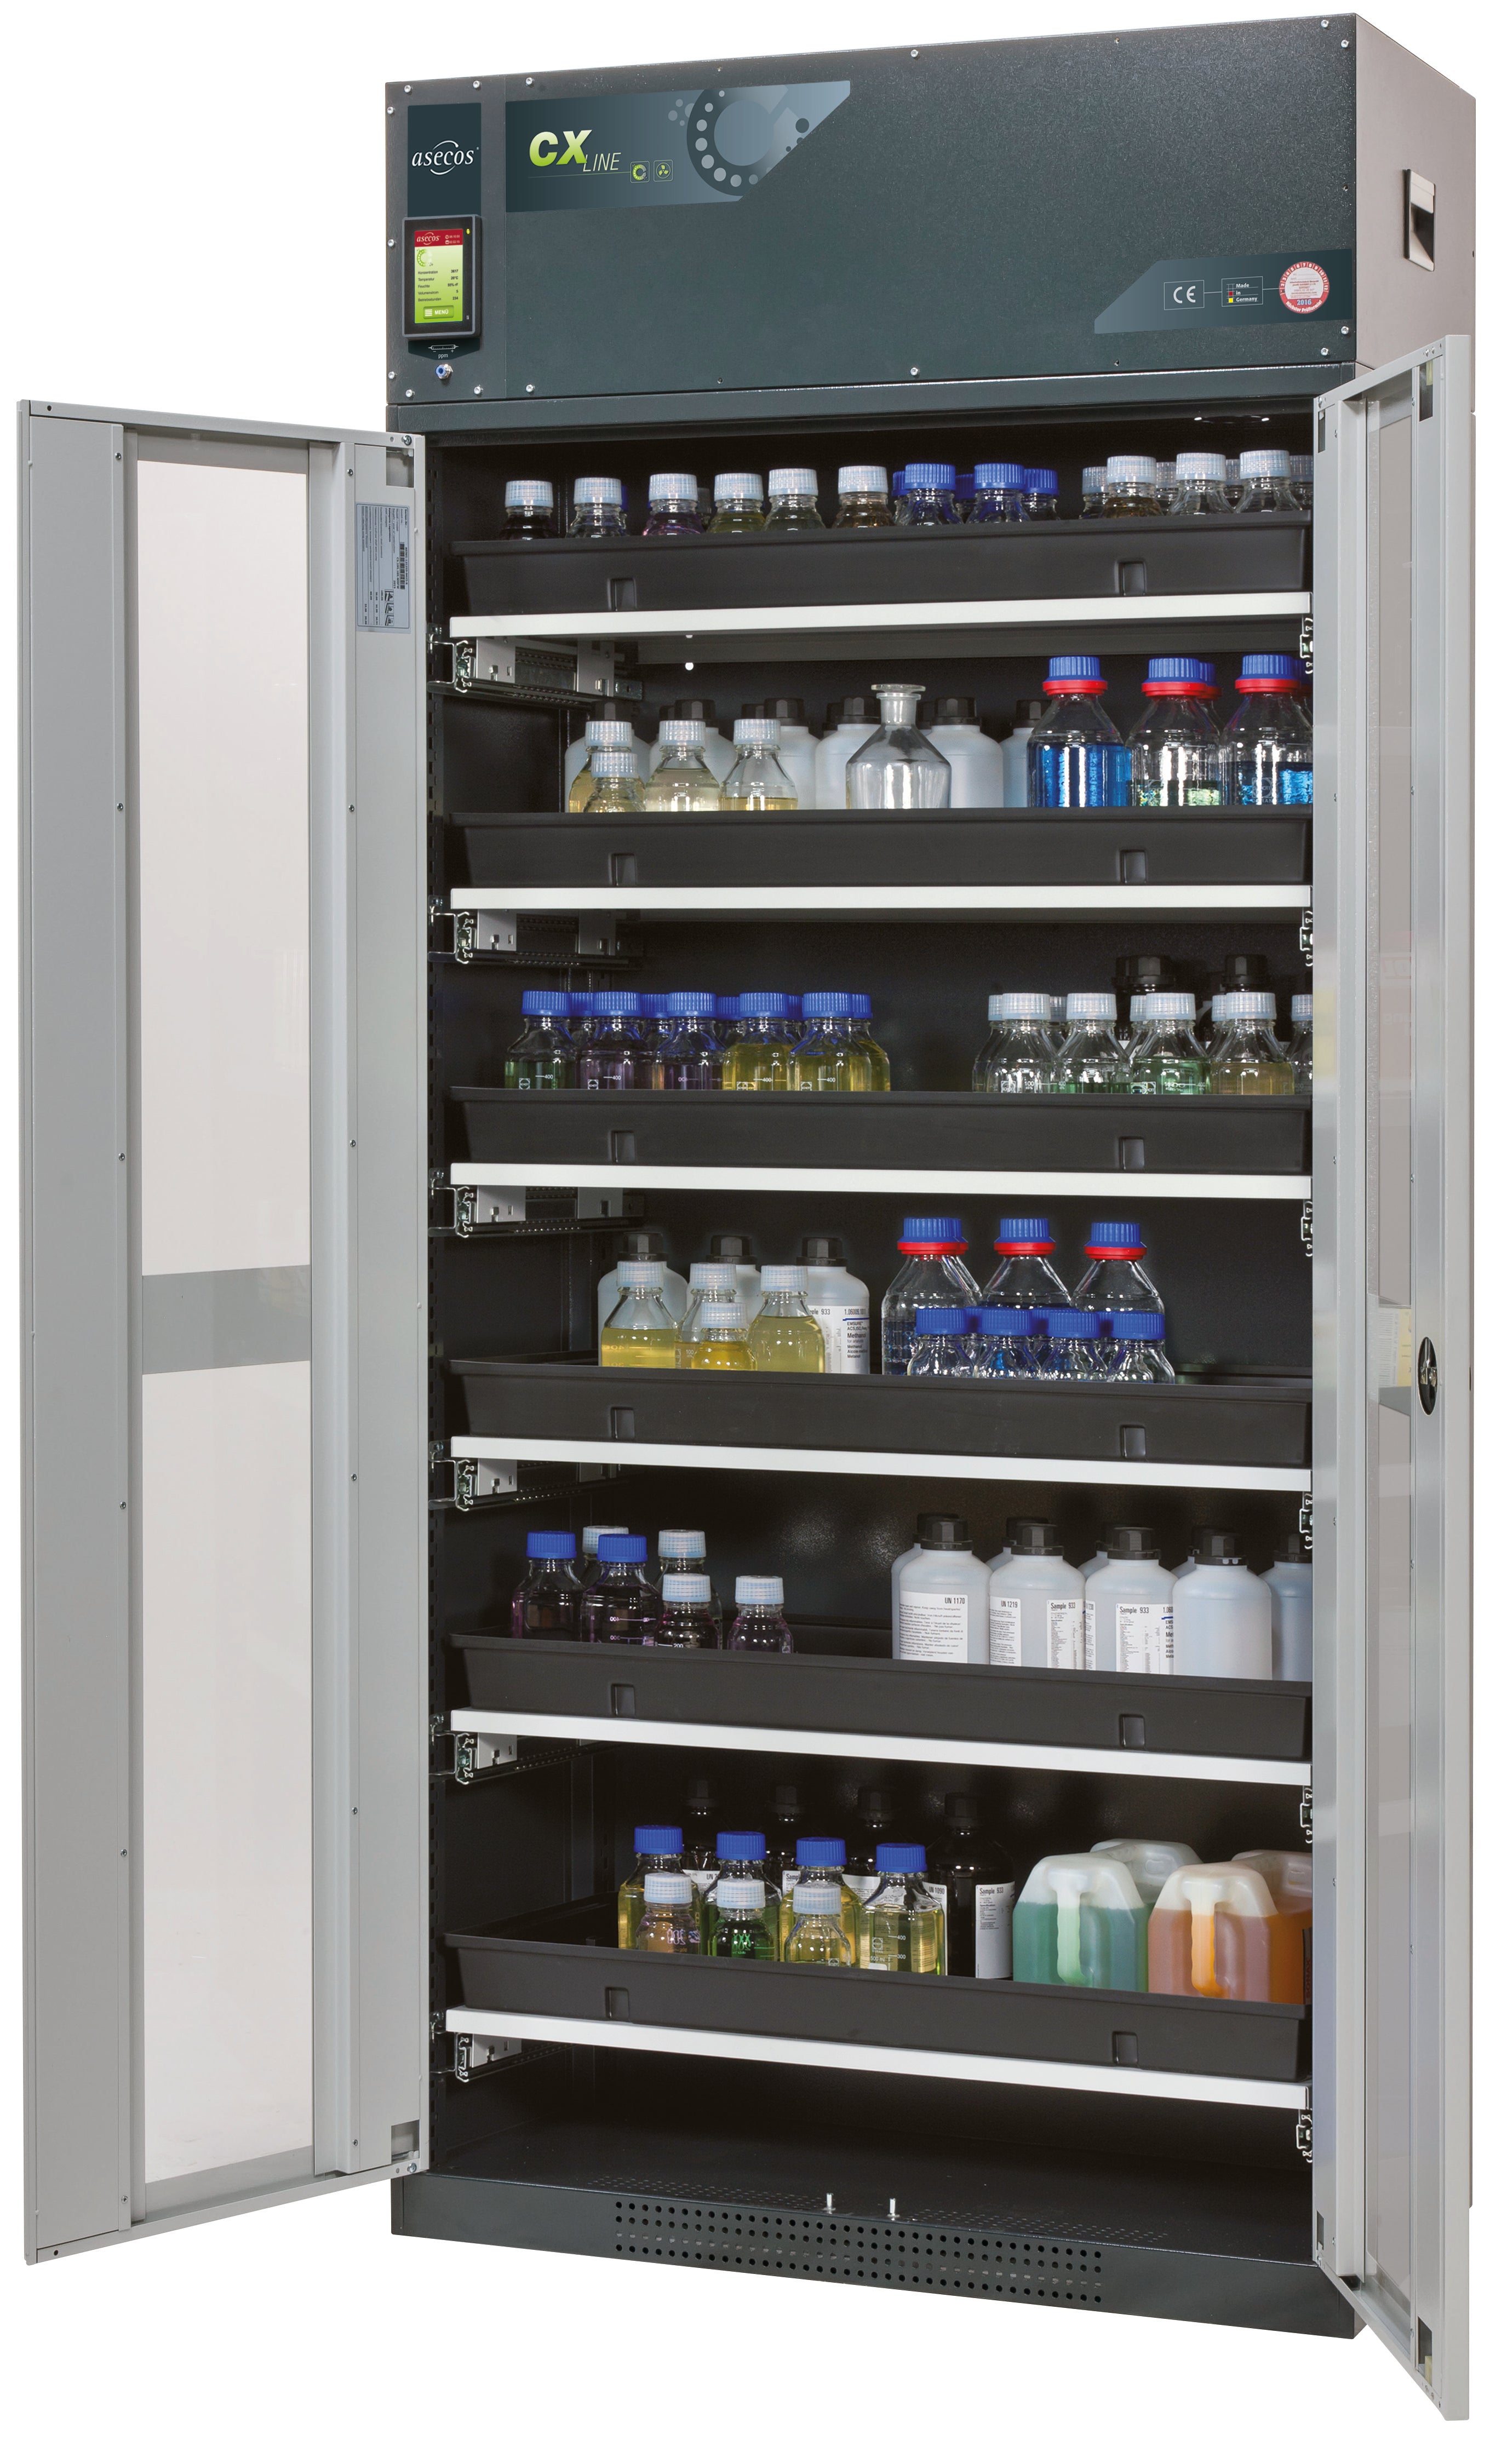 Recirculating air filter cabinet CX-CLASSIC-G model CX.229.105.WDFW in light gray RAL 7035 with 6x AbZ shelf pull-outs (sheet steel/polypropylene)